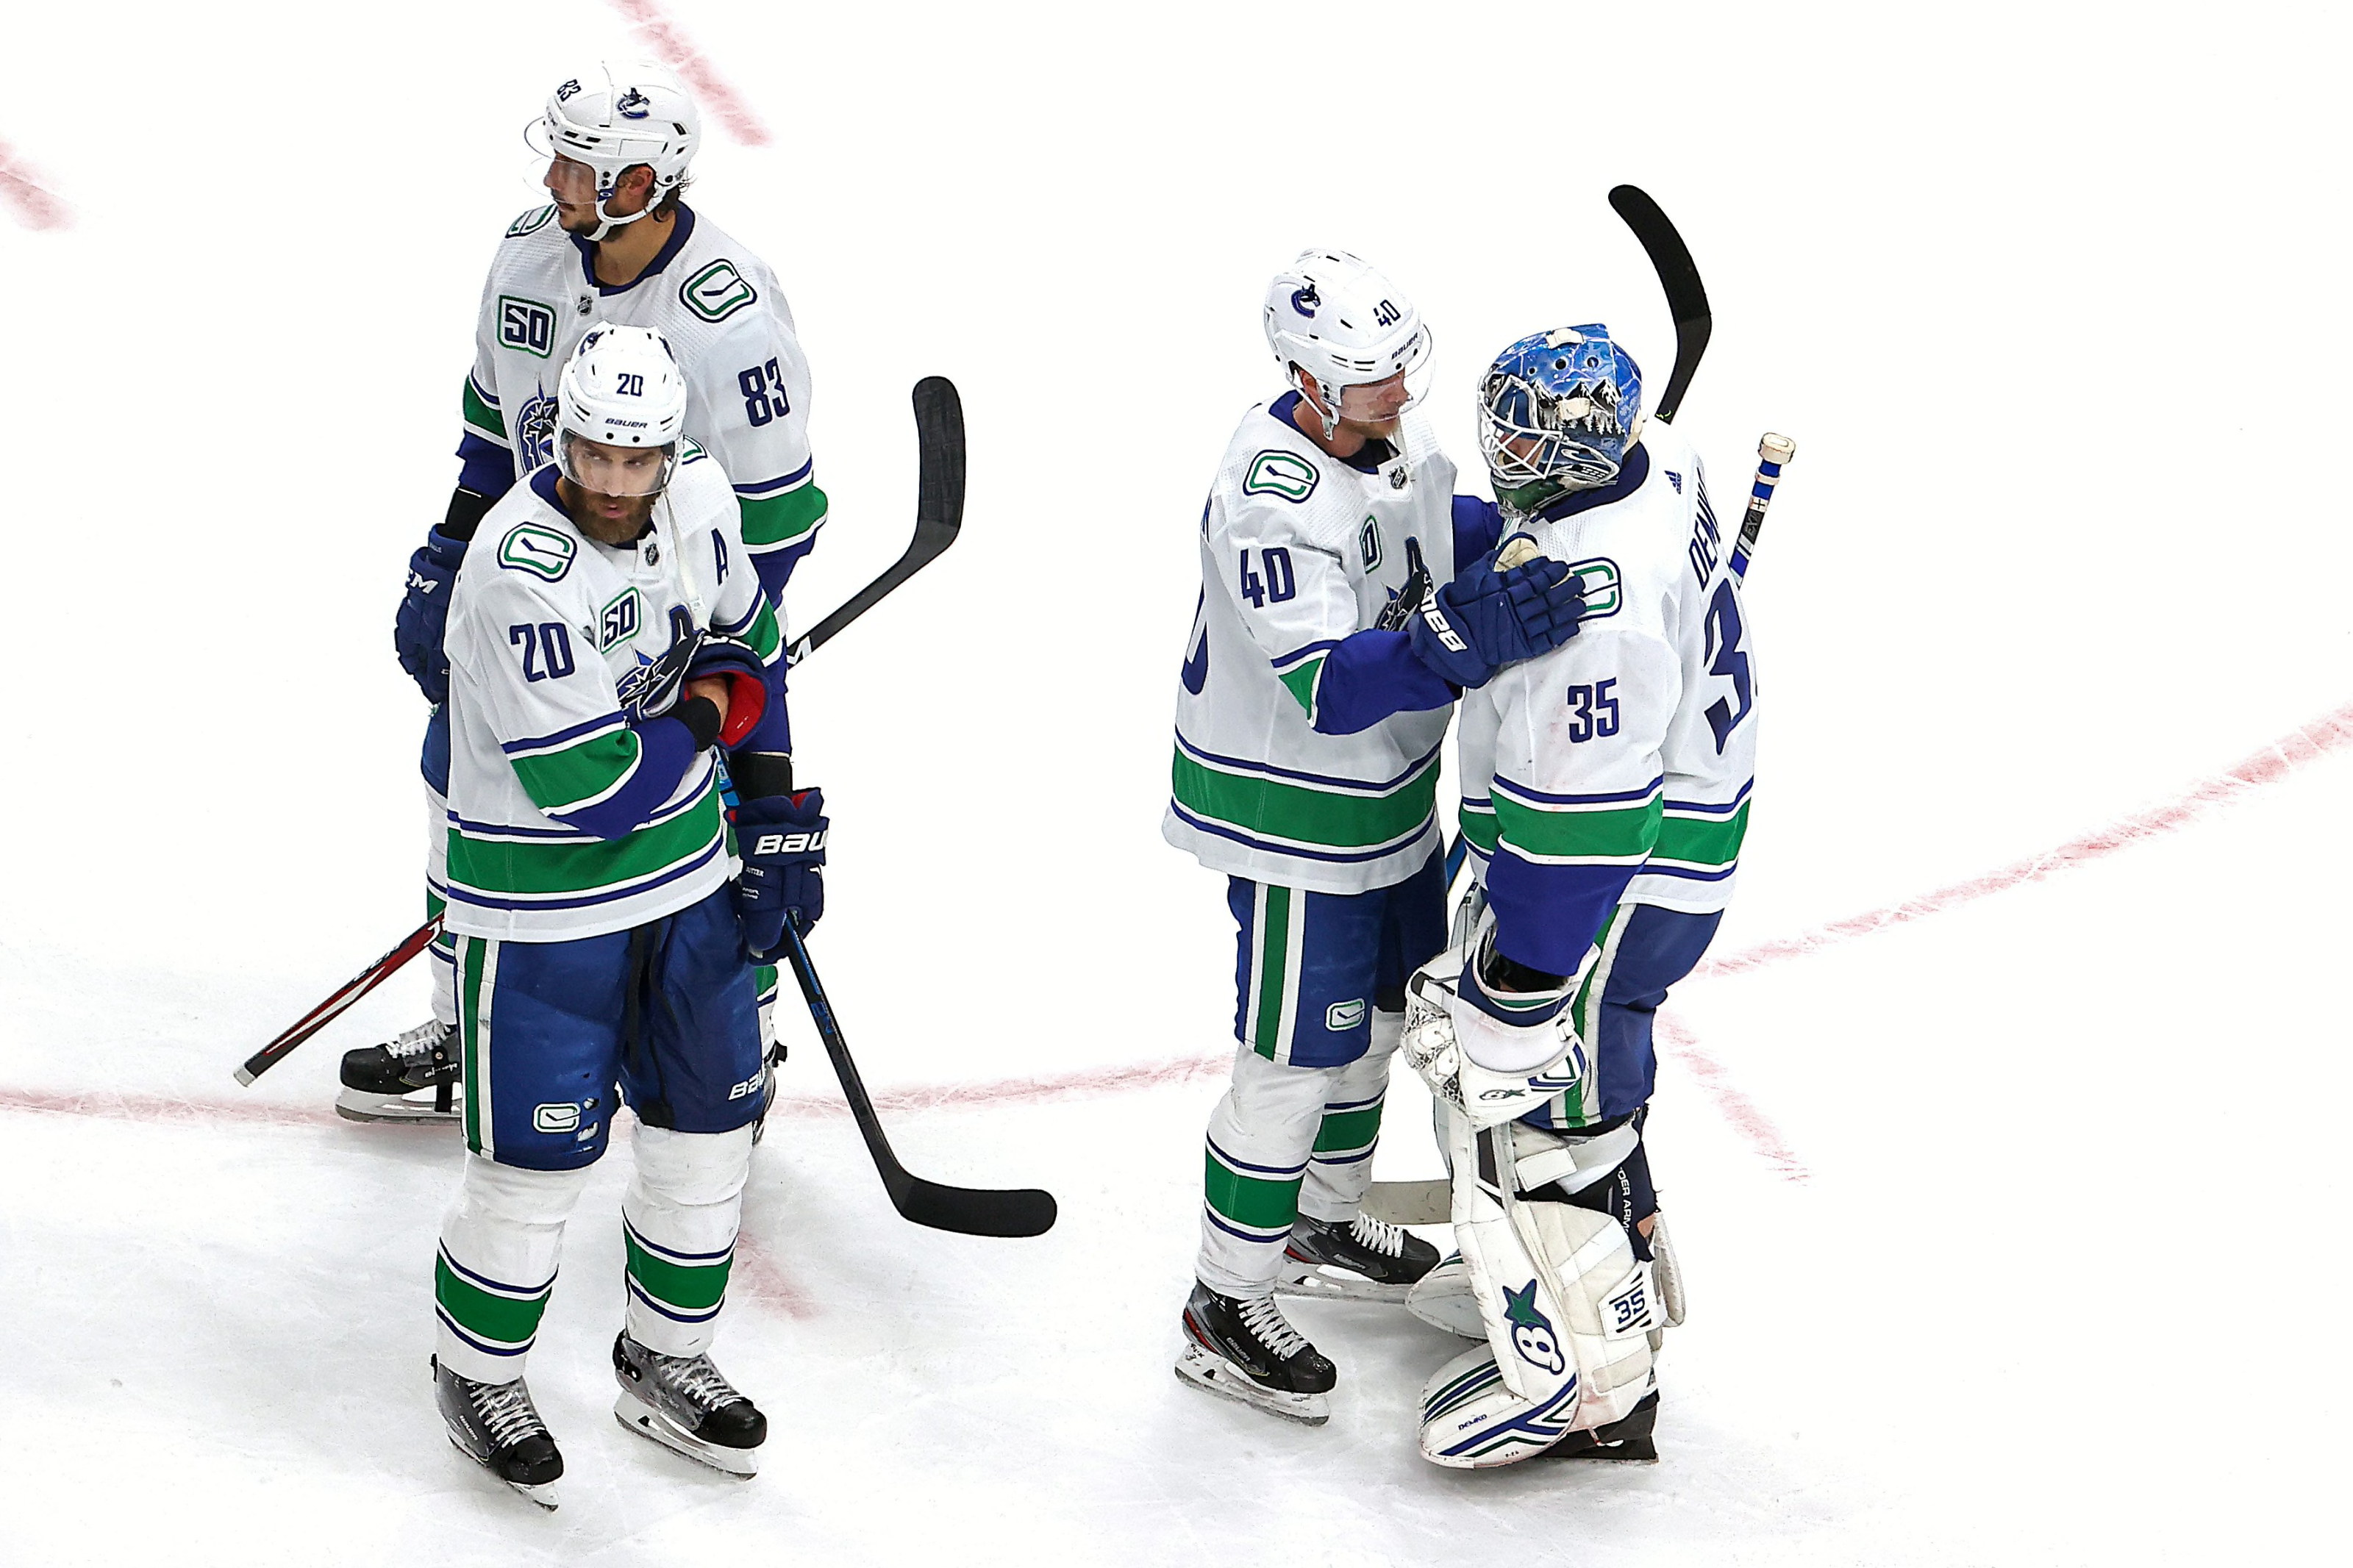 How the skate uniforms became a regular Canucks' feature night